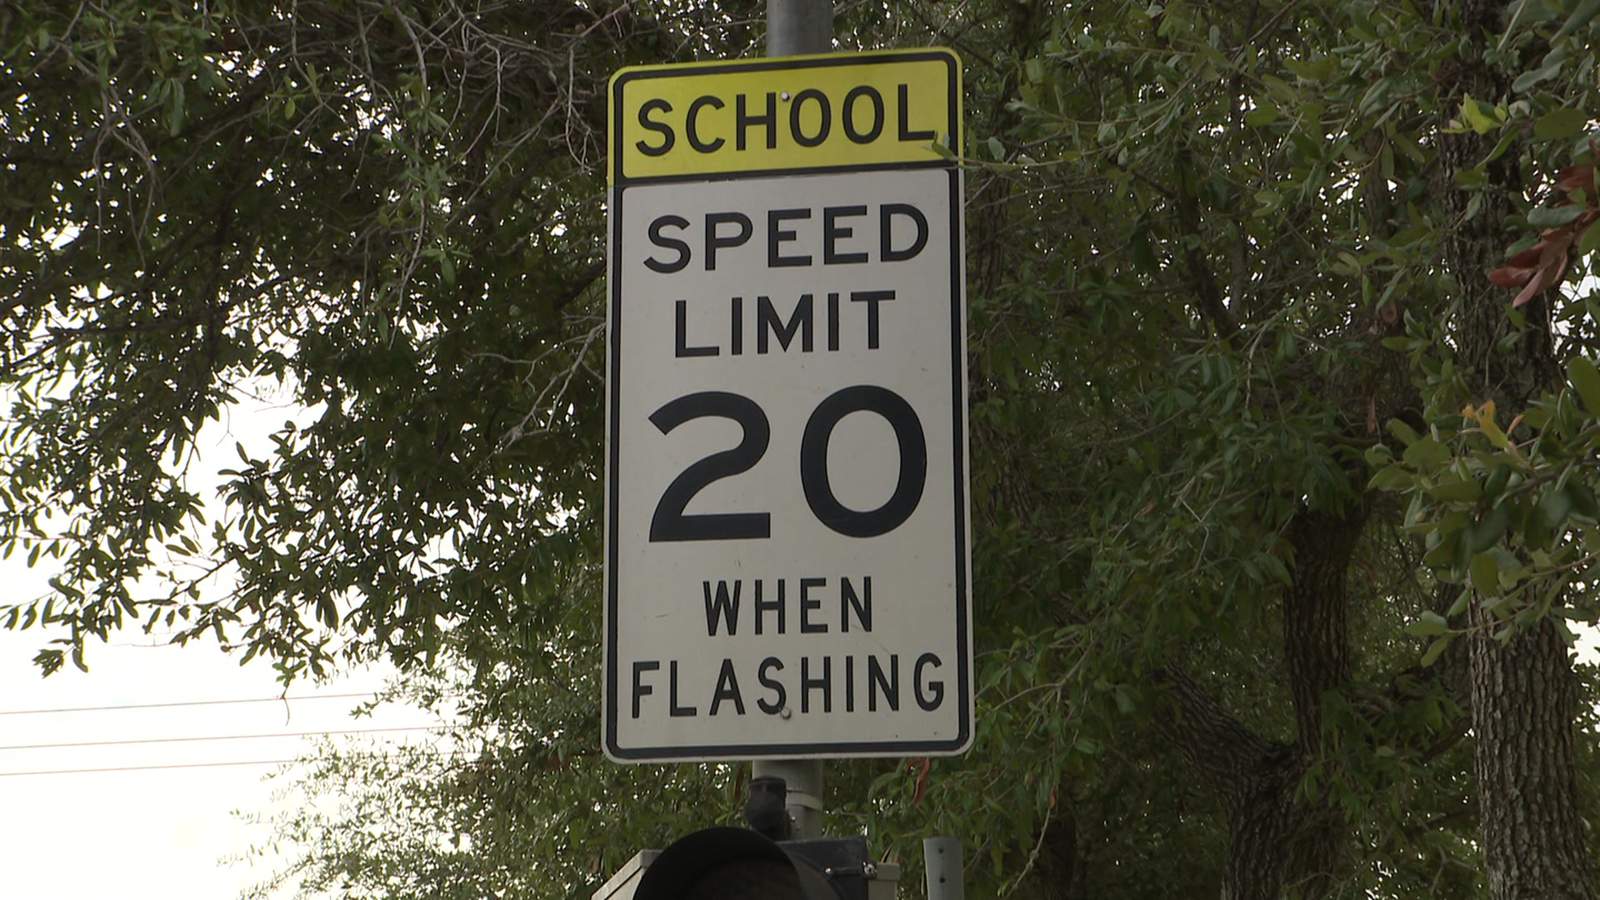 Ask 2: When schools are out for a holiday and the school zone lights are flashing do we still have to go 20 mph?